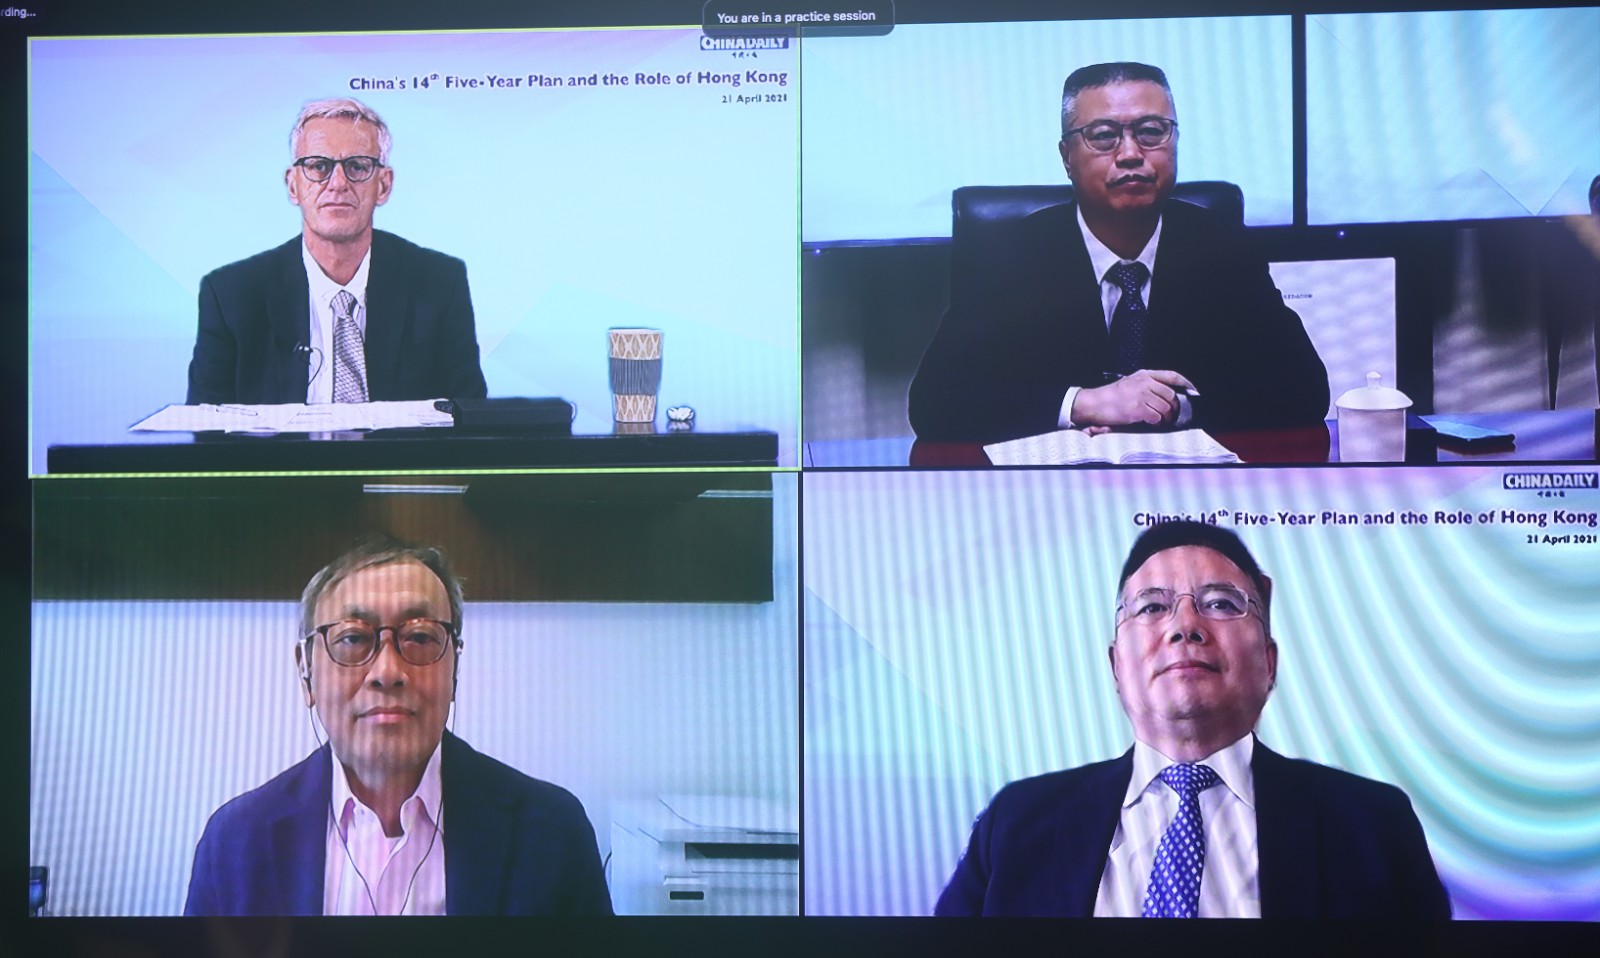 Video Highlight of Webinar "China's 14th Five-Year Plan and the Role of Hong Kong"